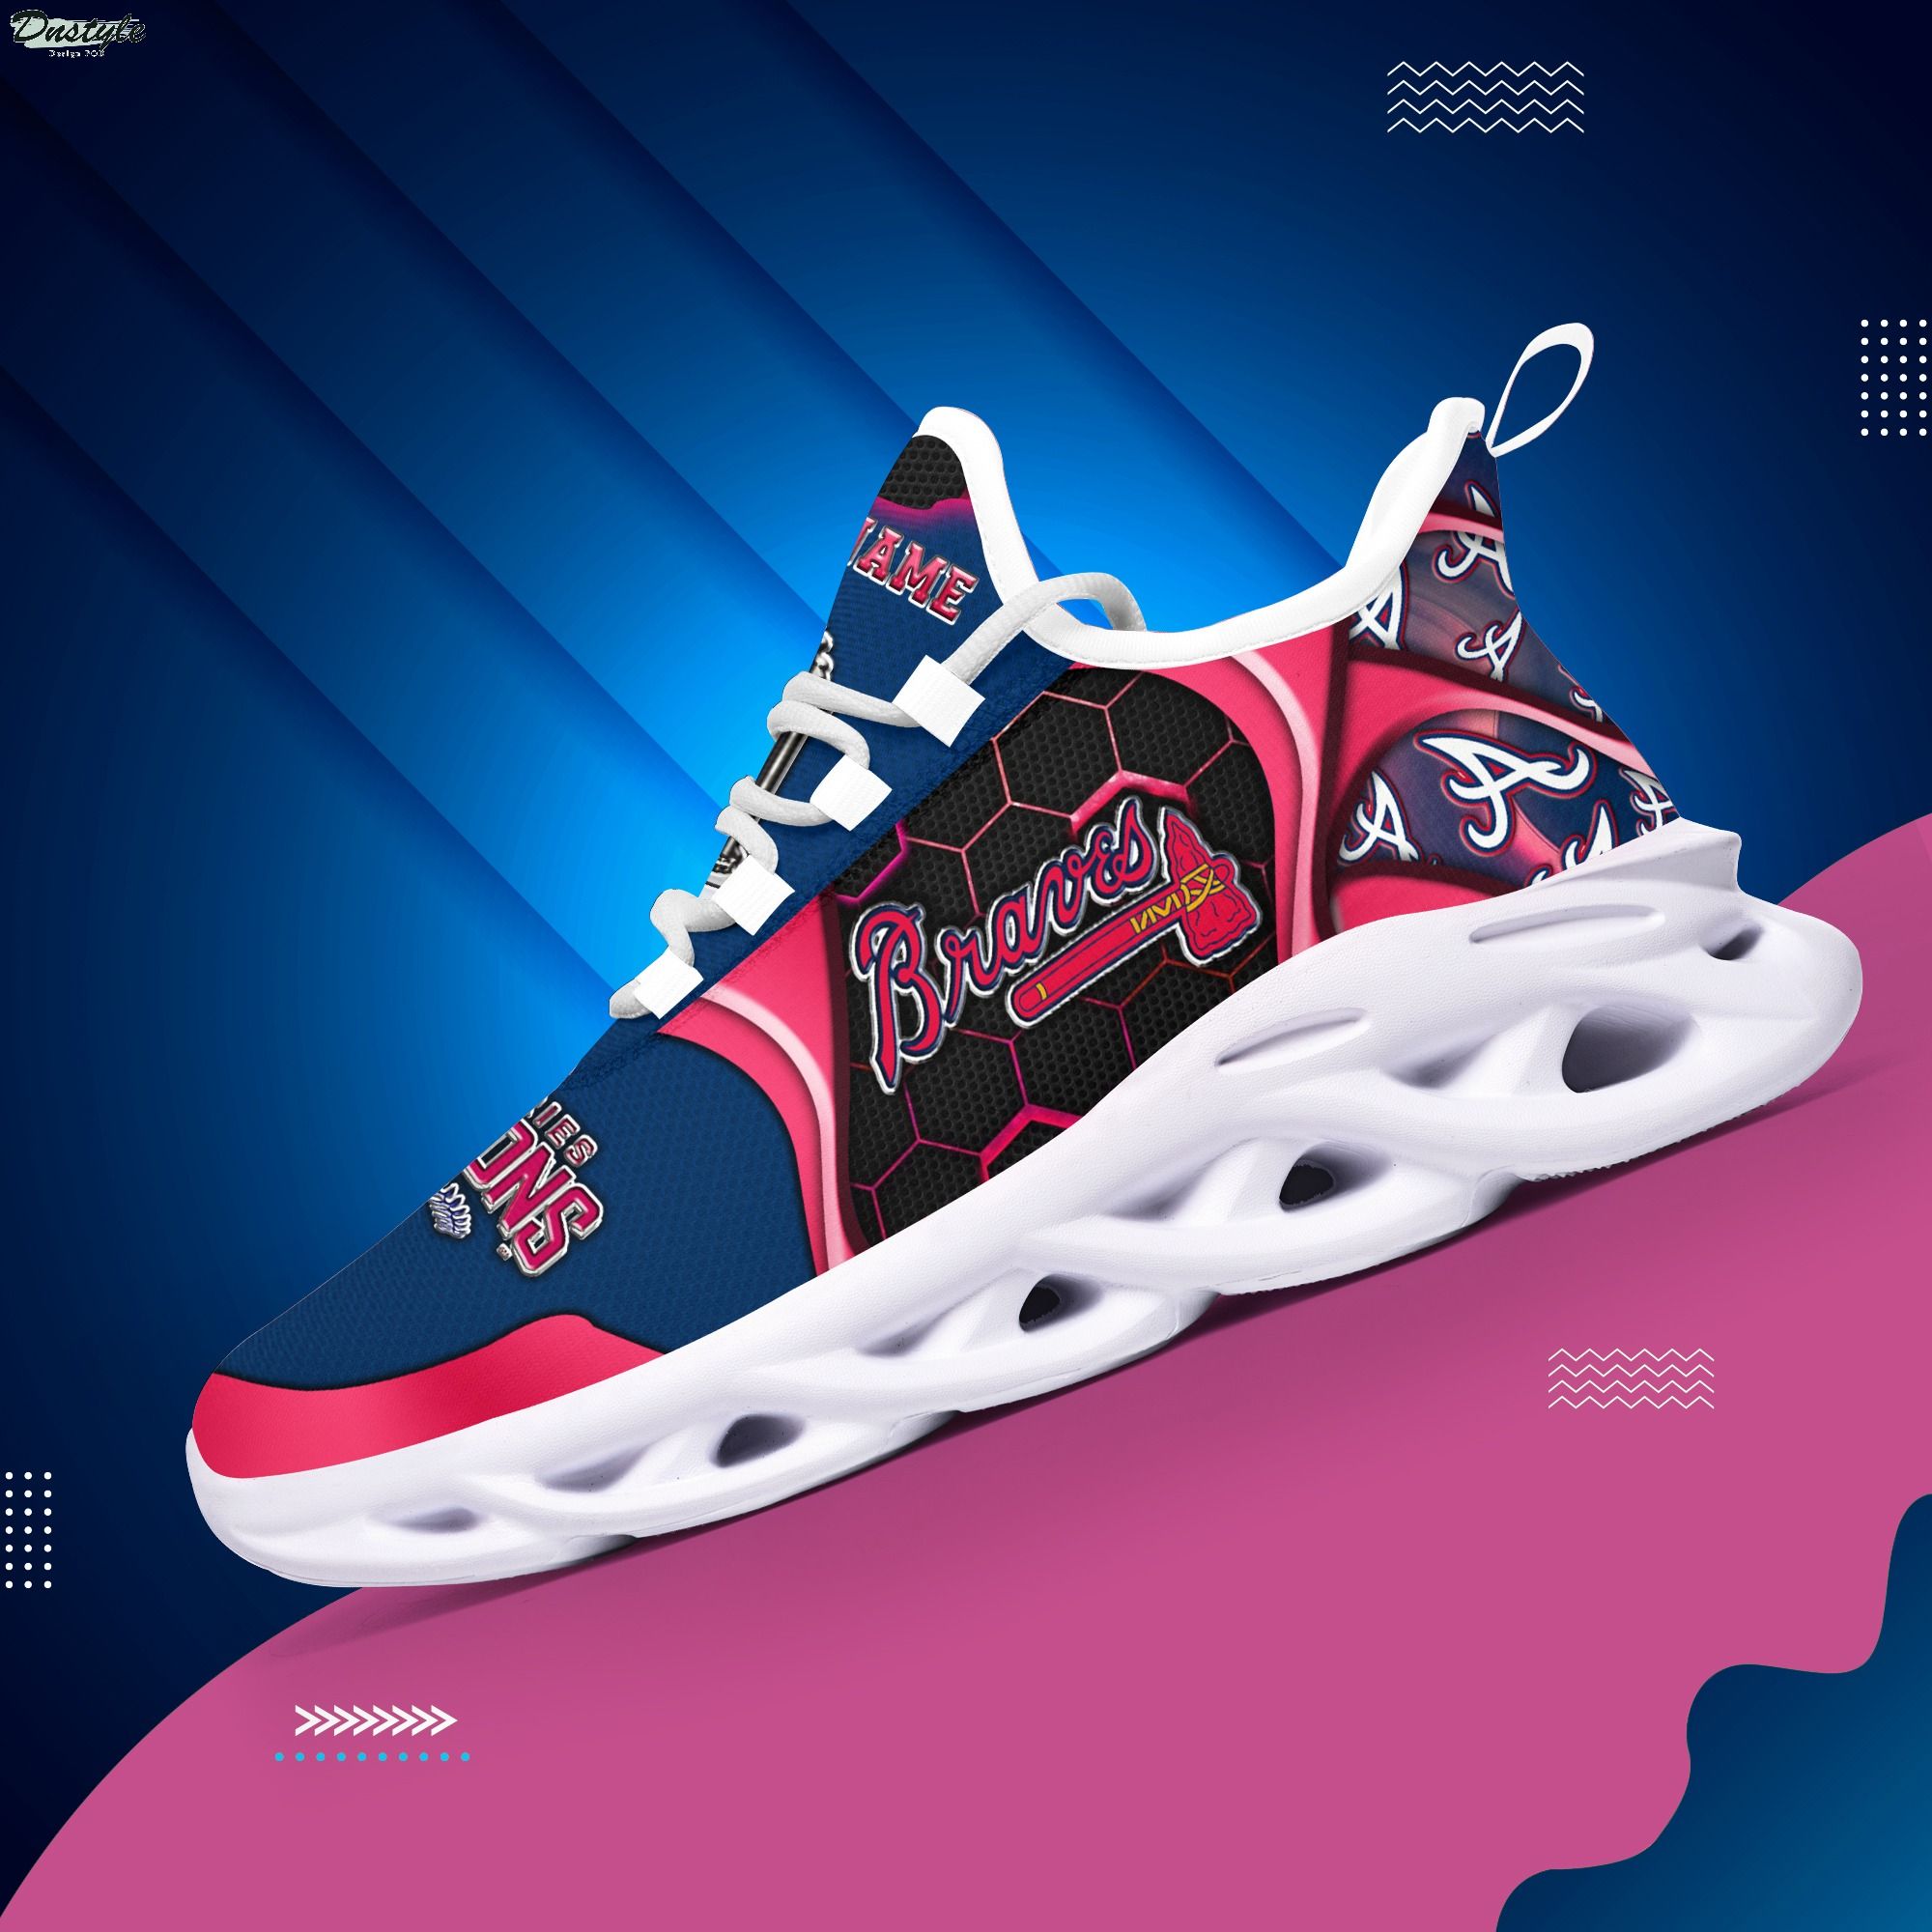 Atlanta Braves Champions 2021 World Series Champions Clunky Sneakers Max Soul Shoes 1